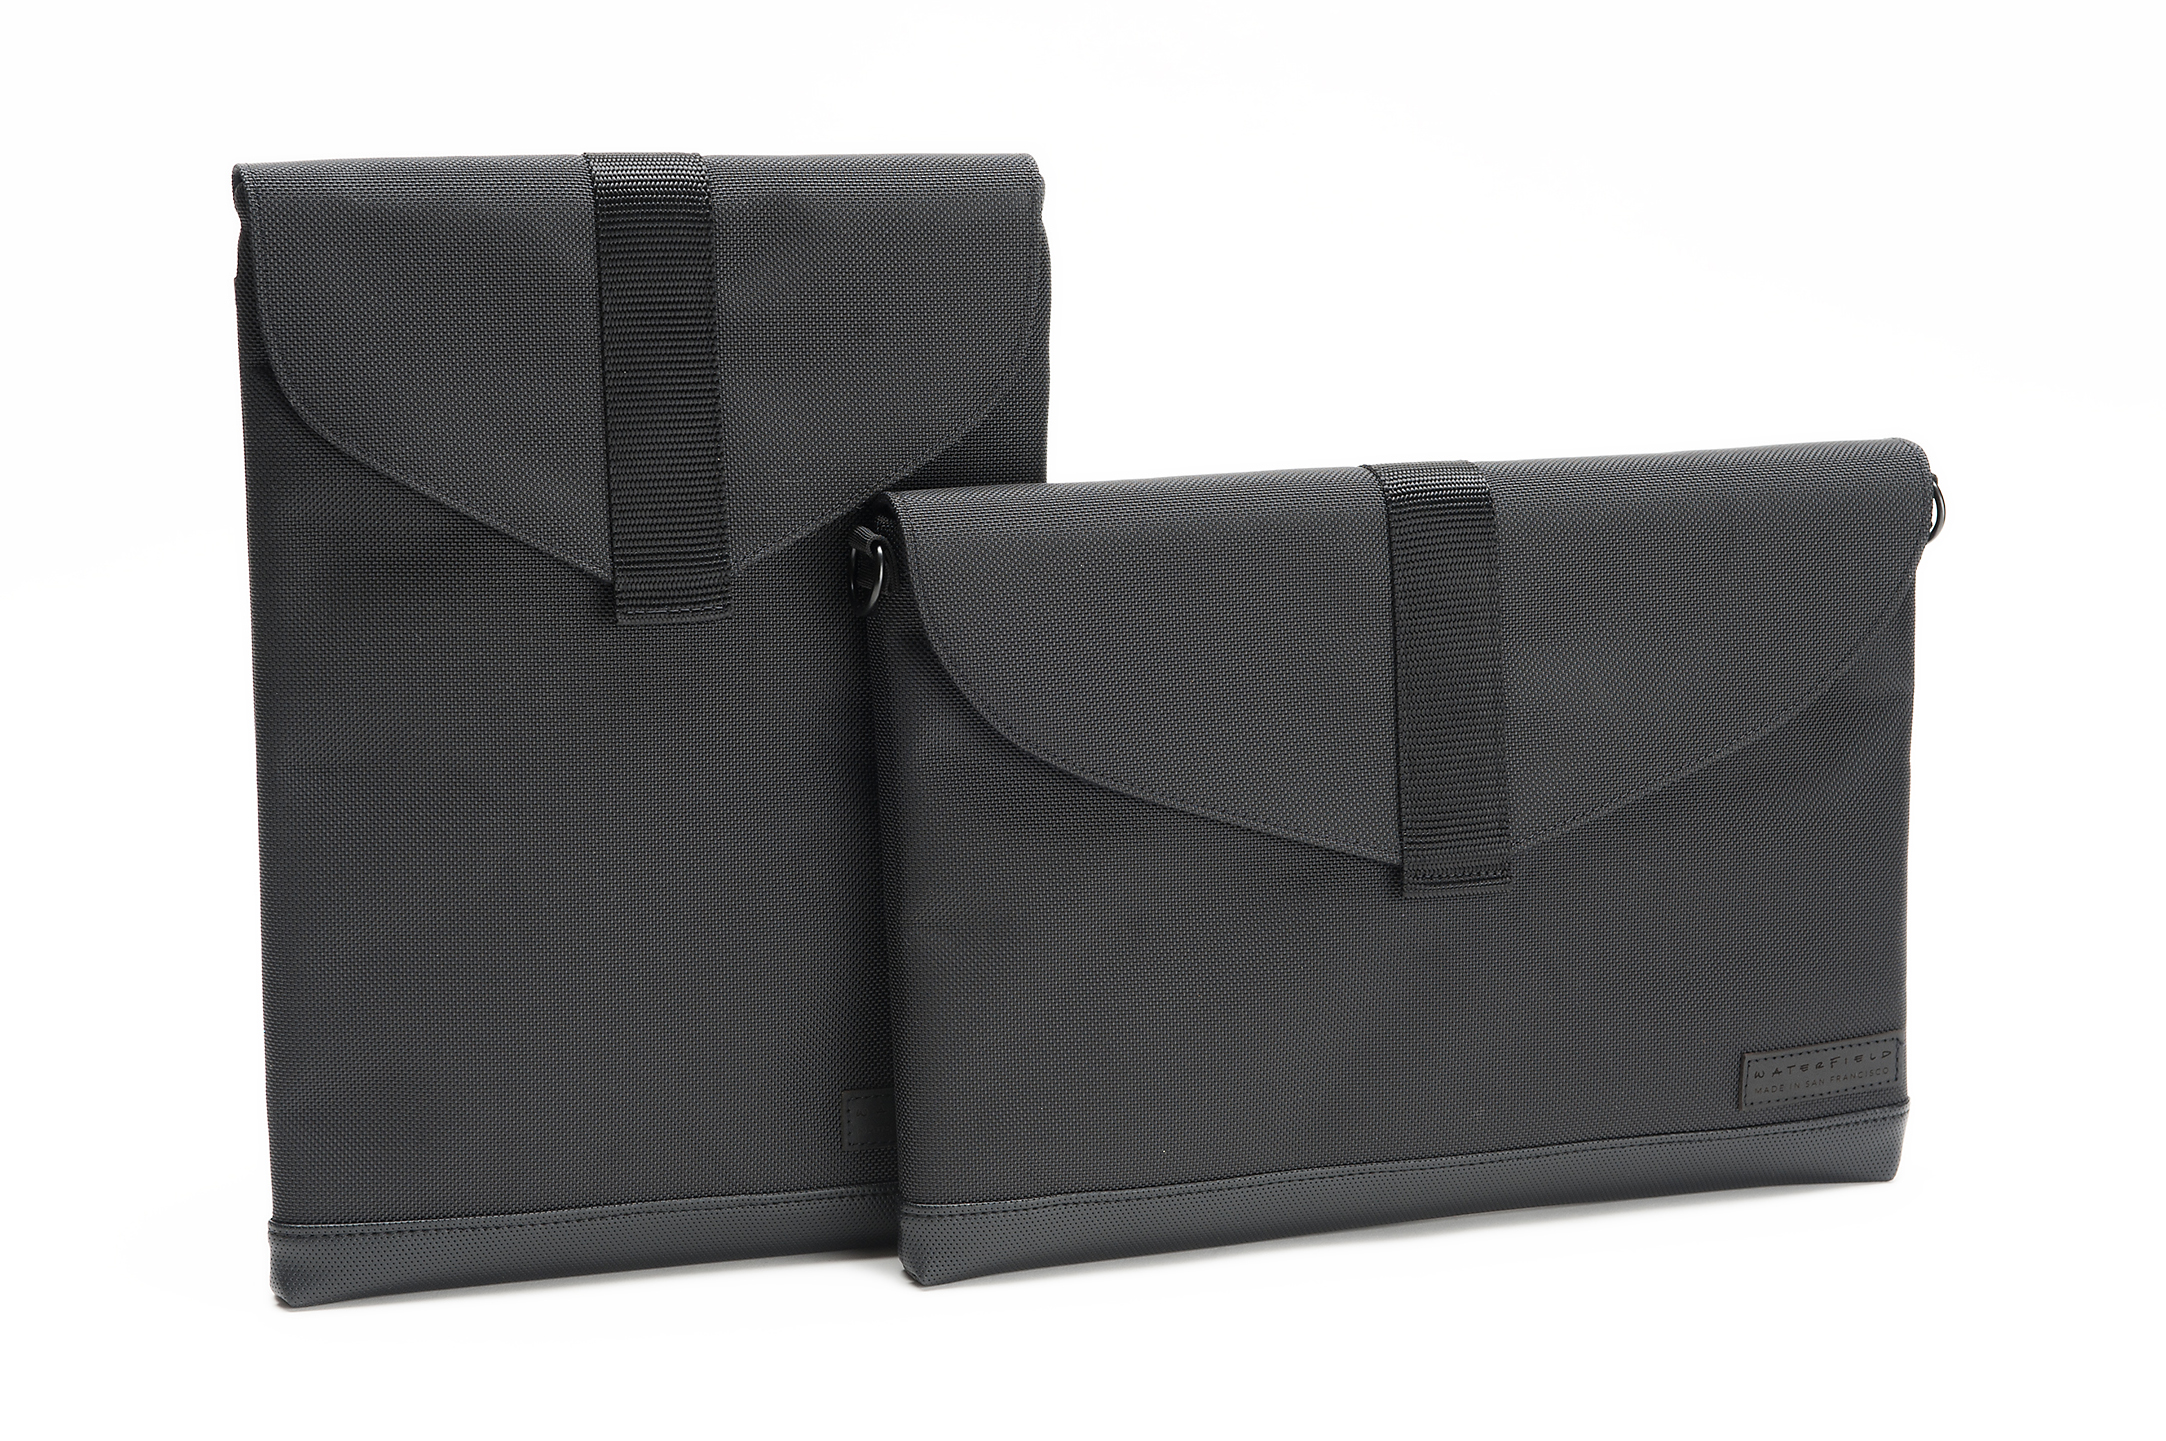 Surface Pro 4 or Surface Book SleeveCase